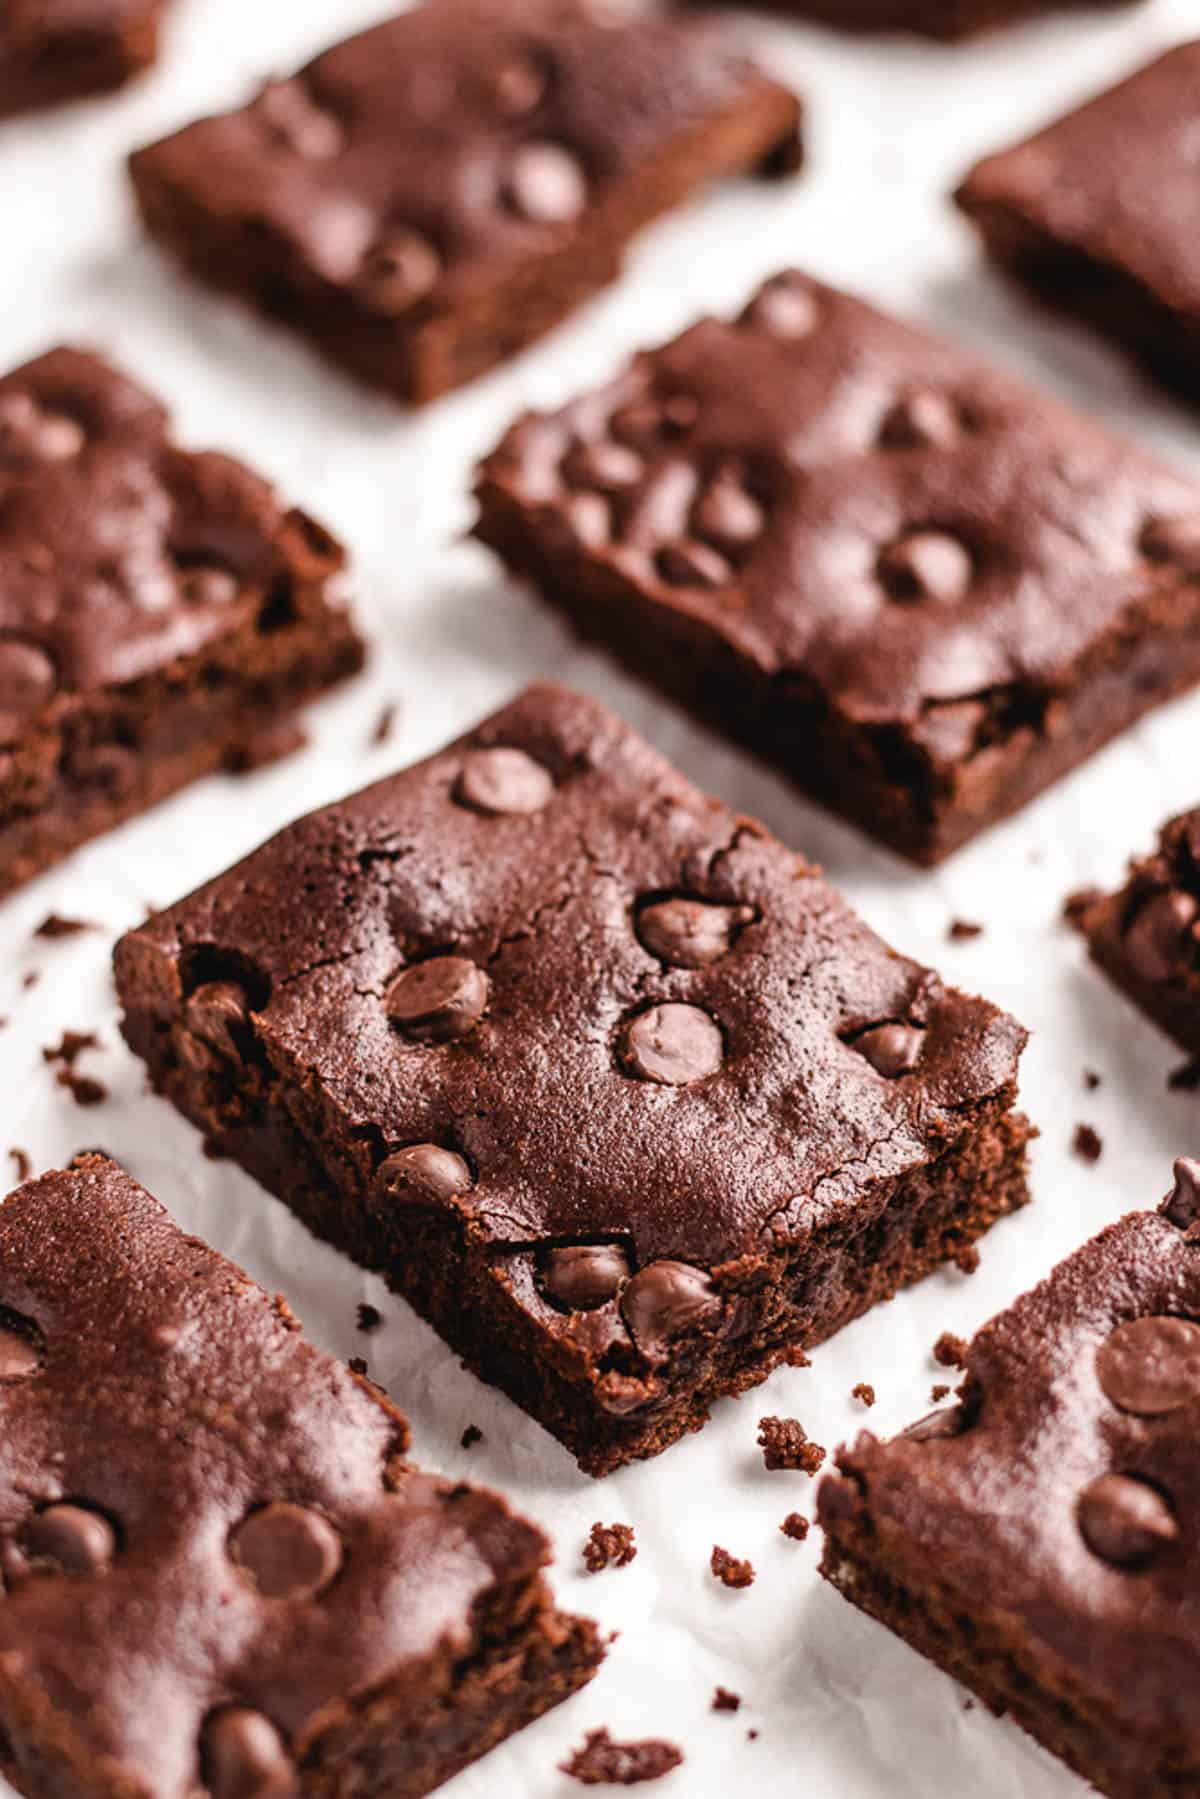 Sliced brownie, topped with chocolate chips.